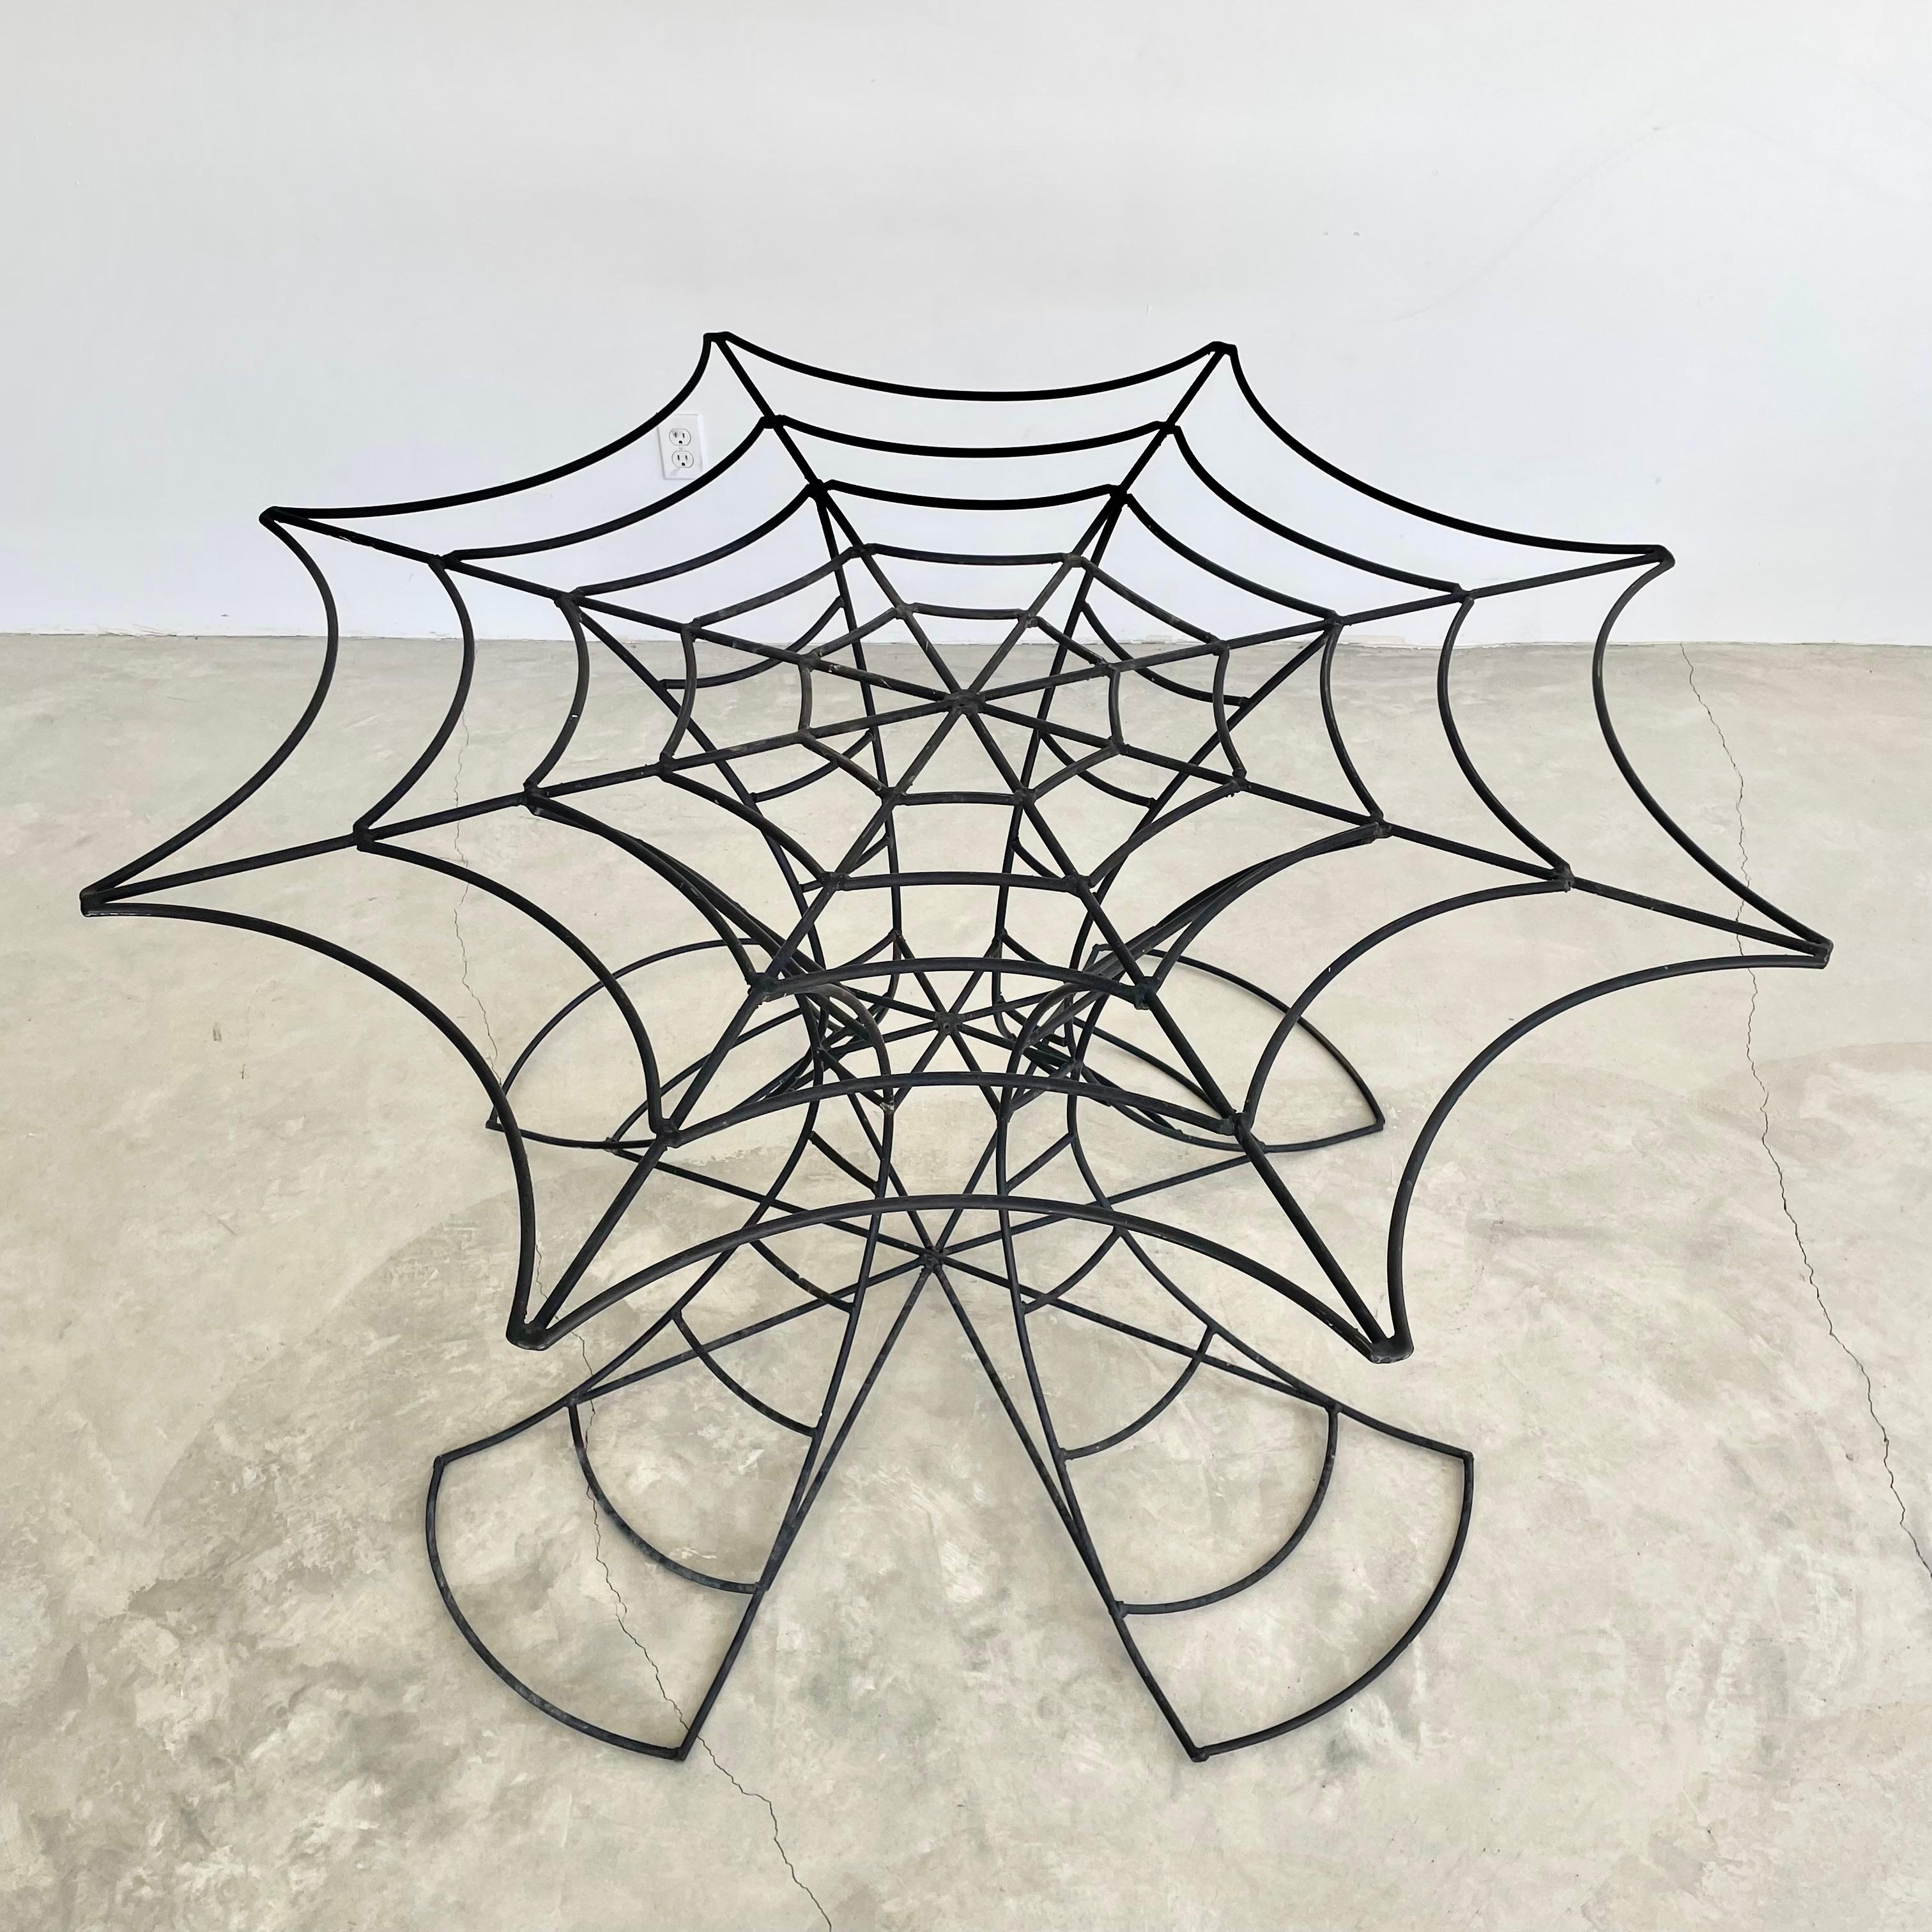 Incredibly unique welded metal table in the design of a massive spider web.Great attention to detail with bends of each metal bar lining up perfectly around the whole table. Base is made up of four metal fan legs that spread out at the base giving